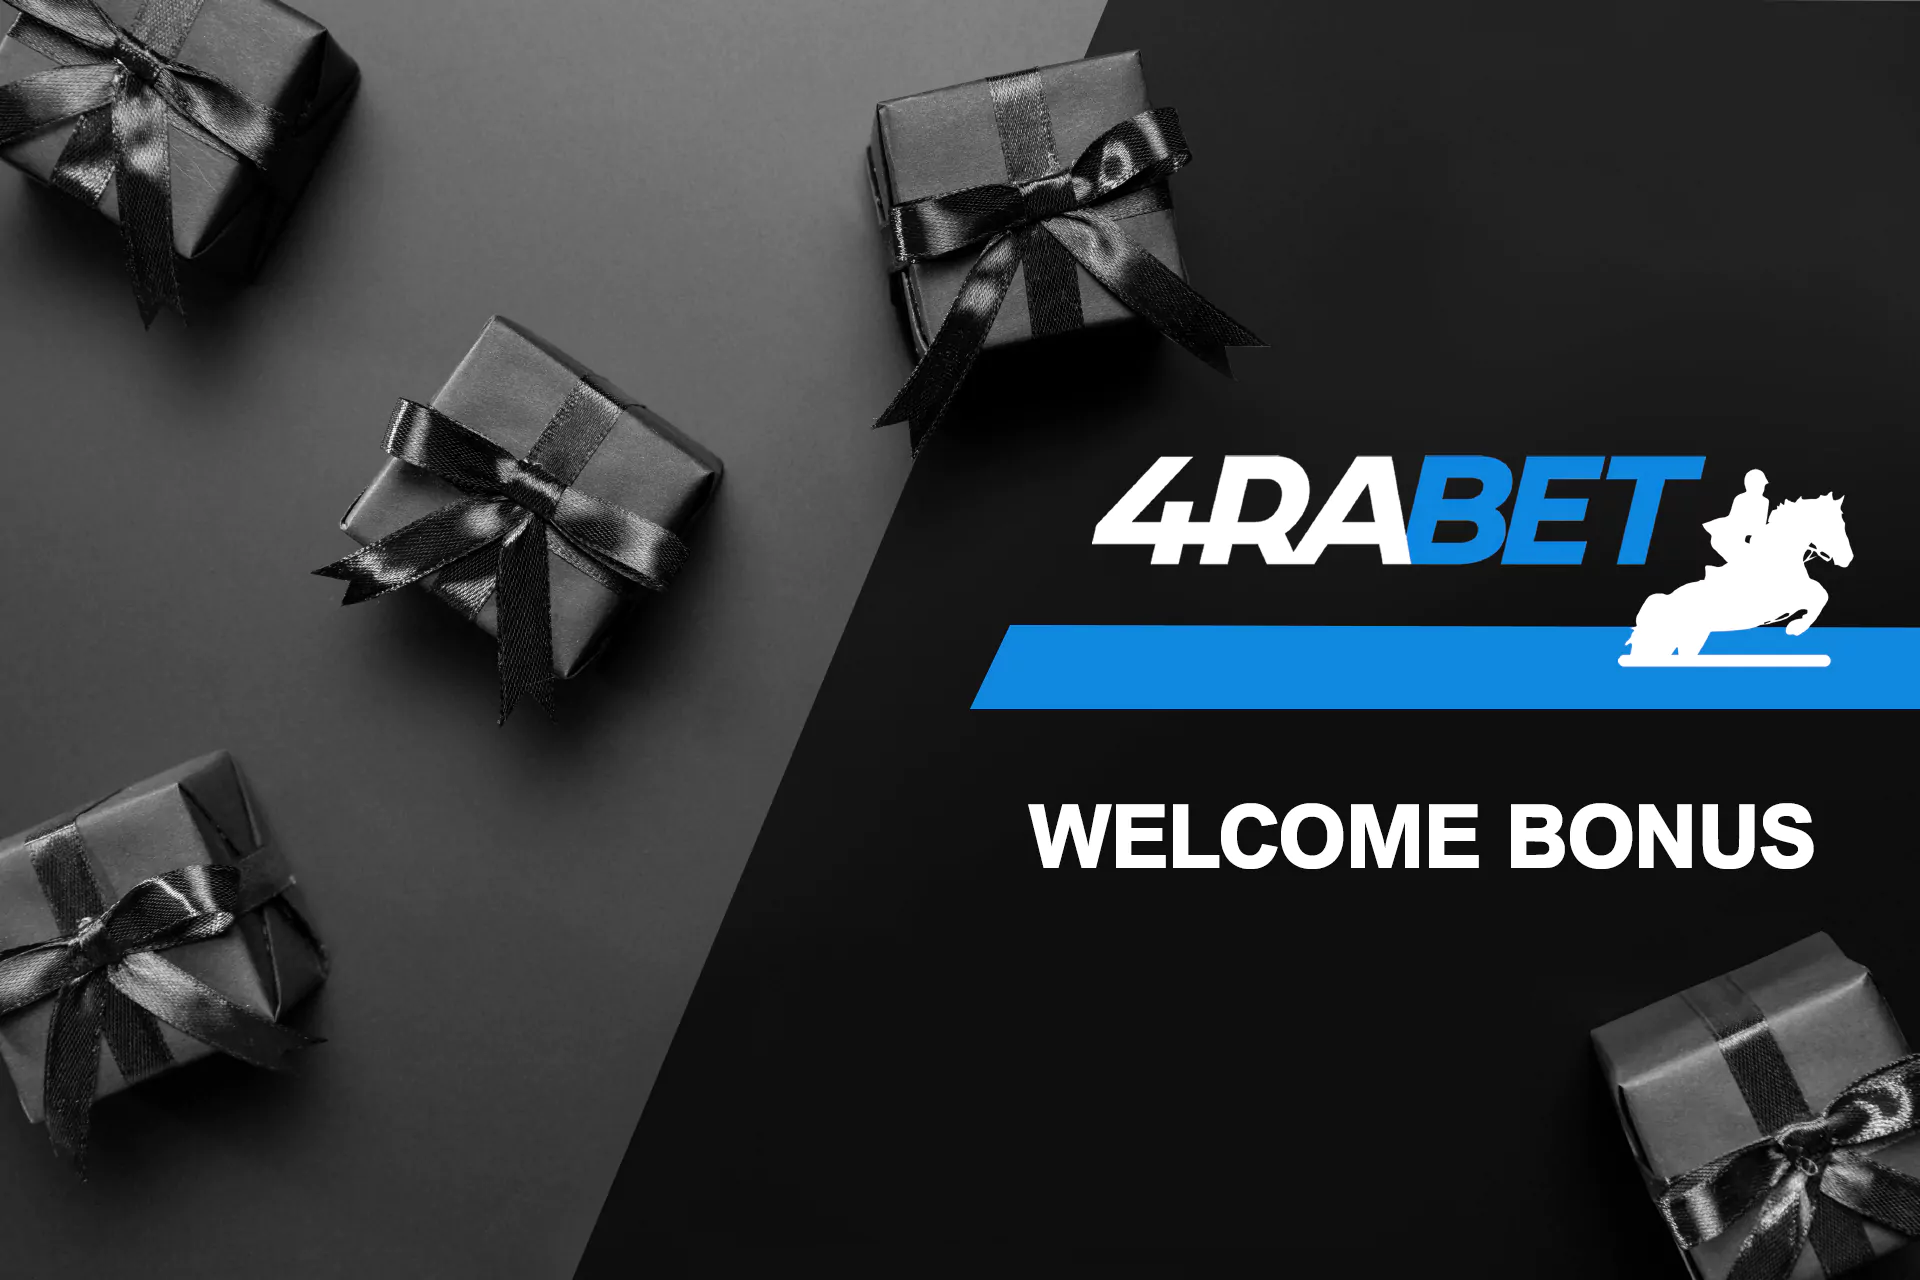 If you are a new user at 4rabet, you can count on getting a welcome offer during registration.